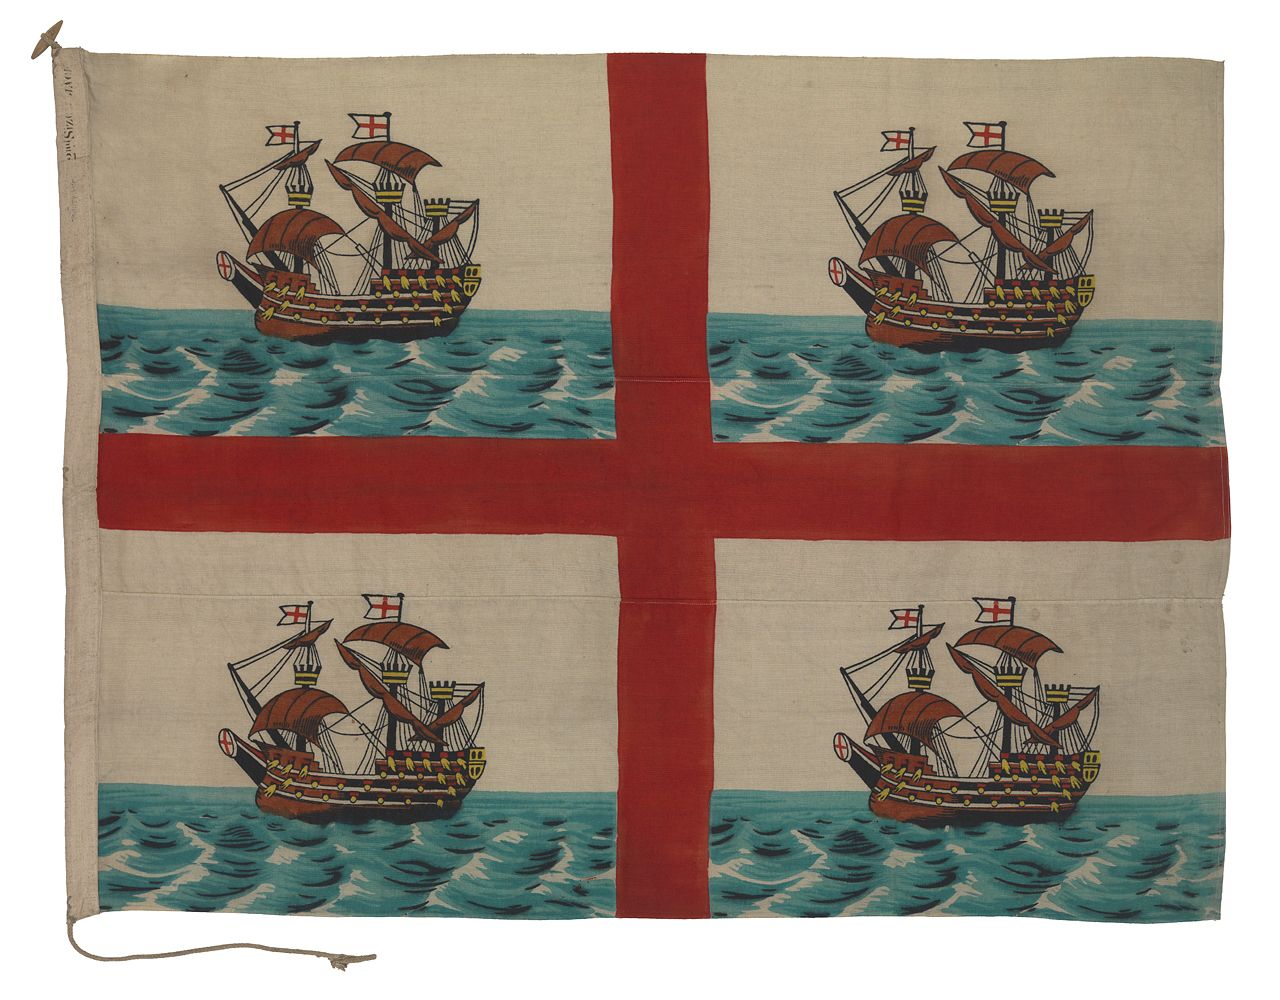 This whimsical 1910 flag belongs to Trinity House, the charity responsible for safeguarding Britain's seafaring community and managing its lighthouses. 